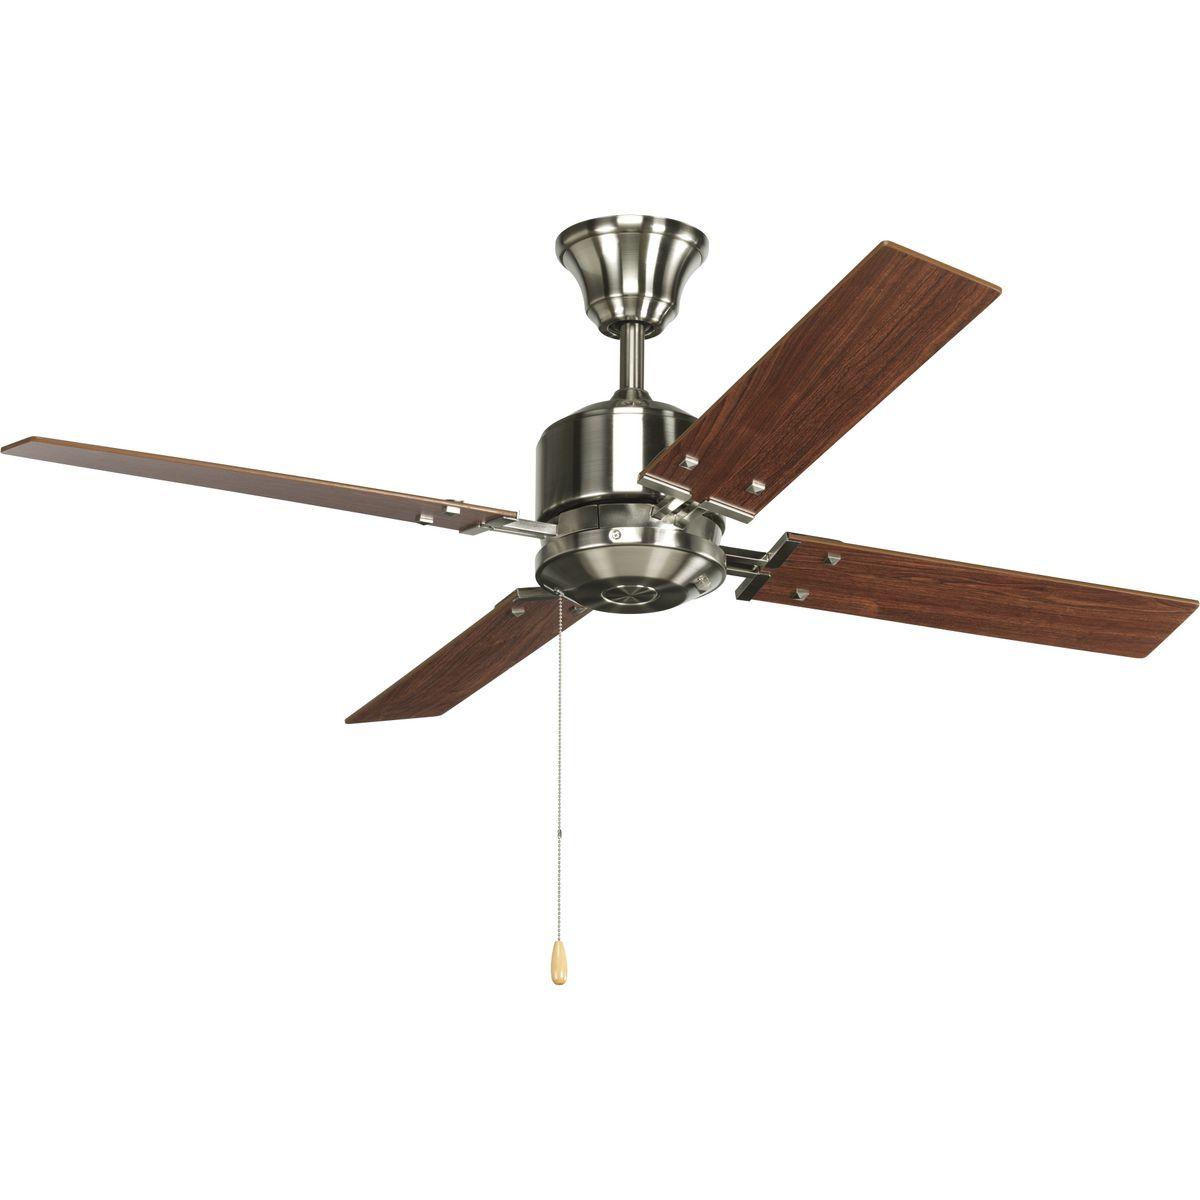 Hubbell P2531-09 52" four-blade Fan with reversible Natural Cherry/Cherry blades and a Brushed Nickel finish. The Clifton Heights ceiling fan offers great performance and value. This contemporary styled fan features a powerful, 3-speed motor that can be reversed to provid